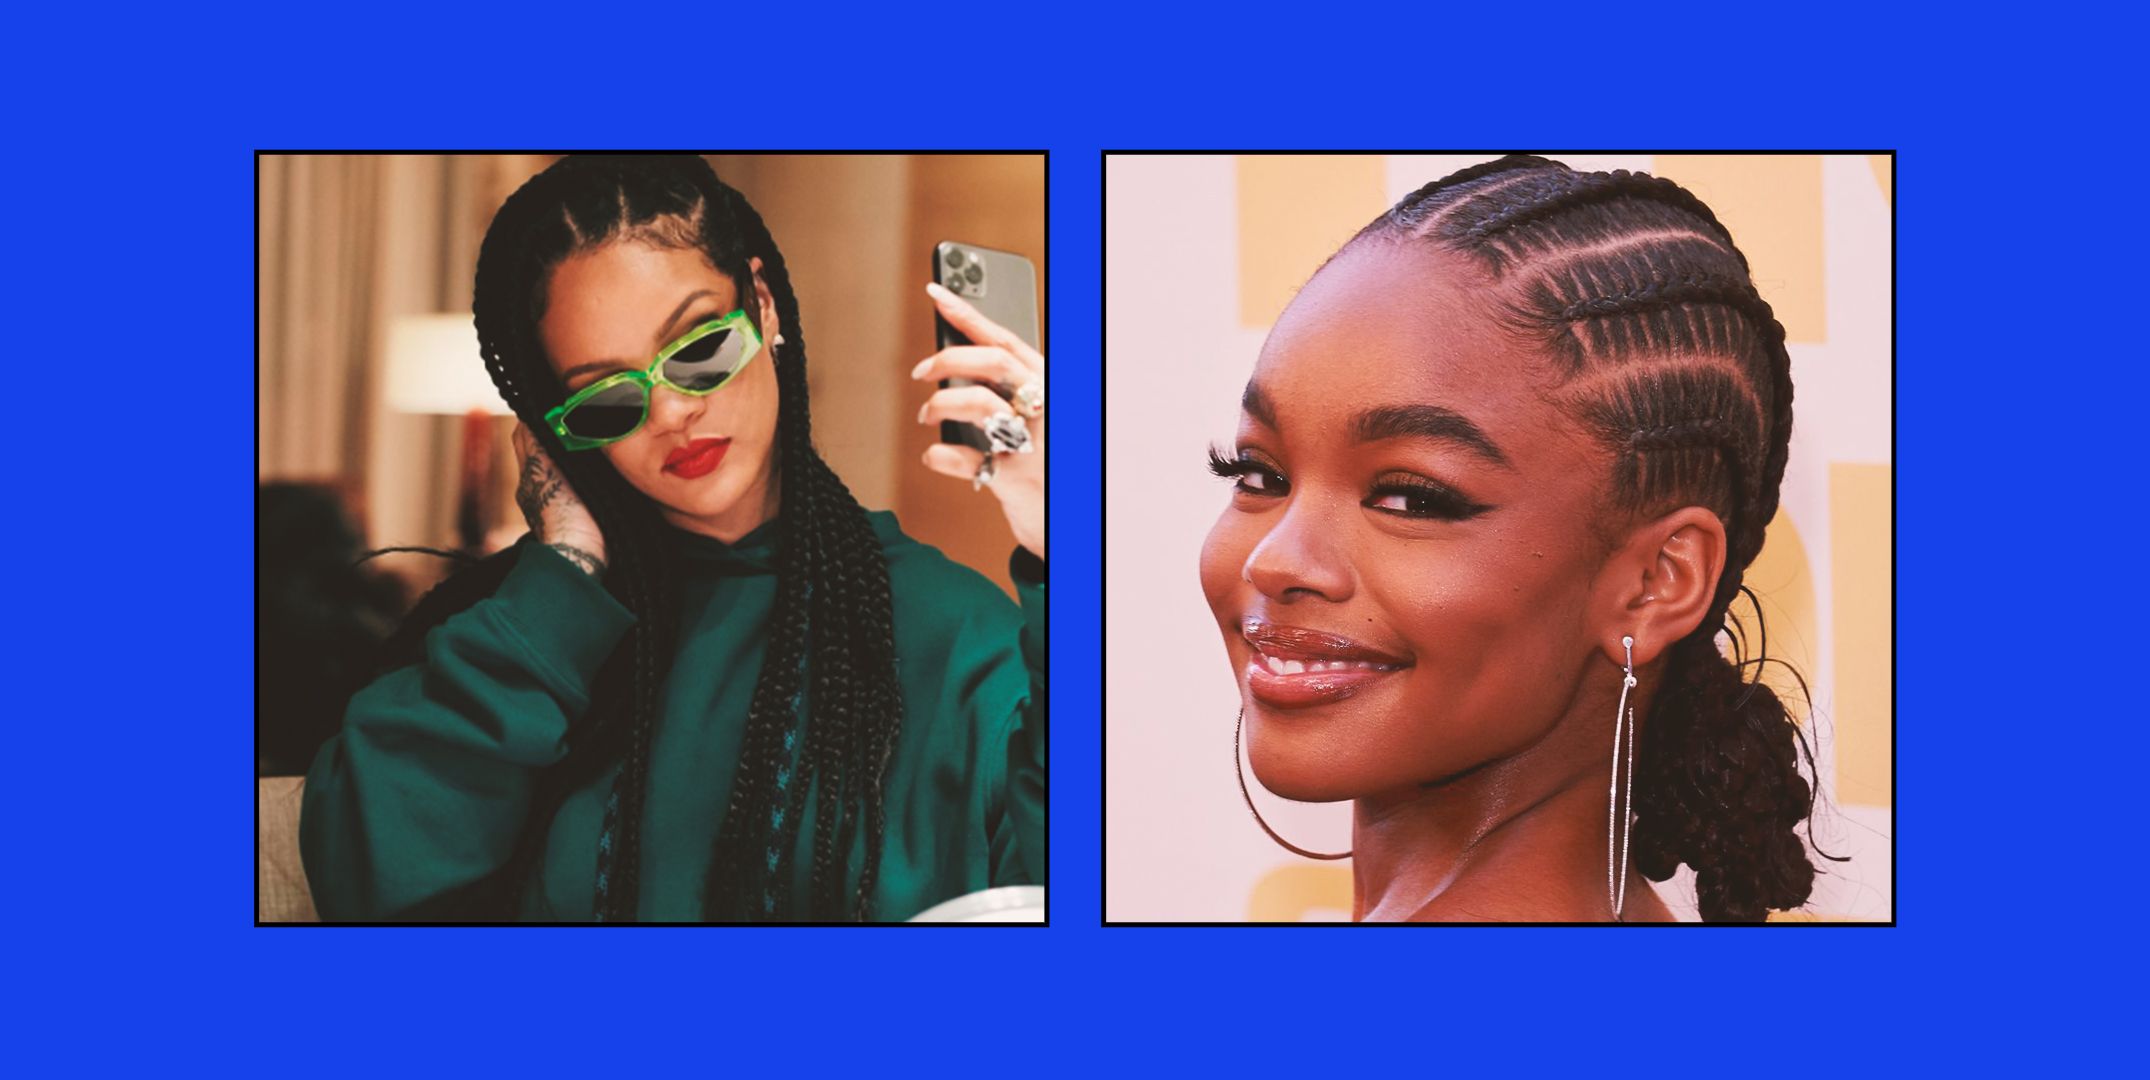 10 braided hairstyles that make you stand out anytime - Businessday NG